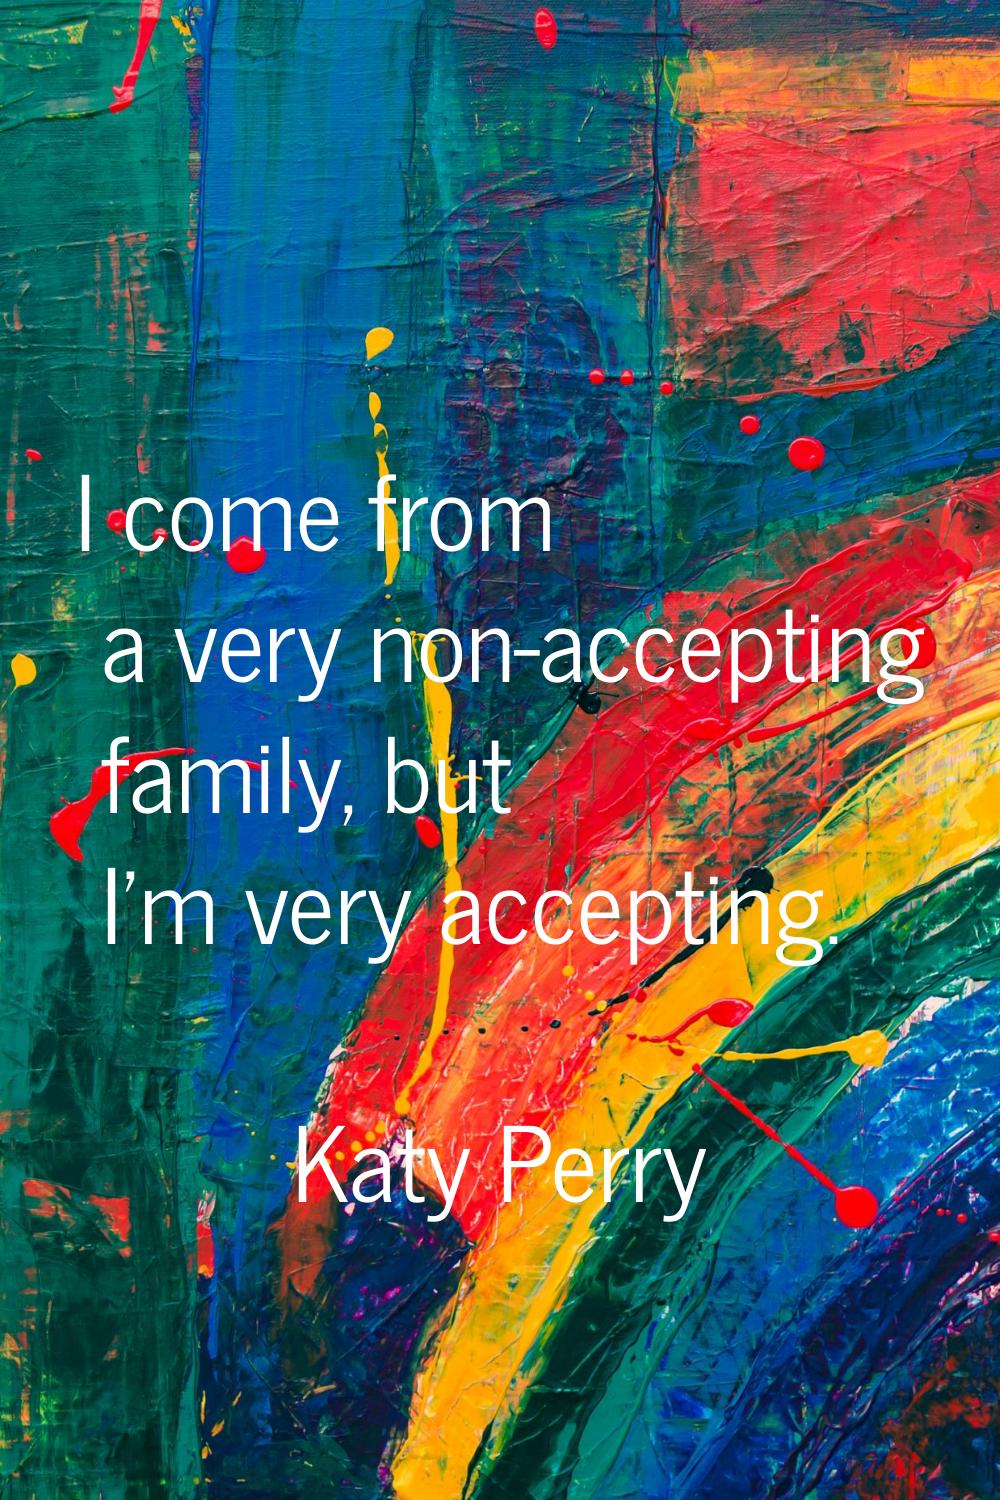 I come from a very non-accepting family, but I'm very accepting.